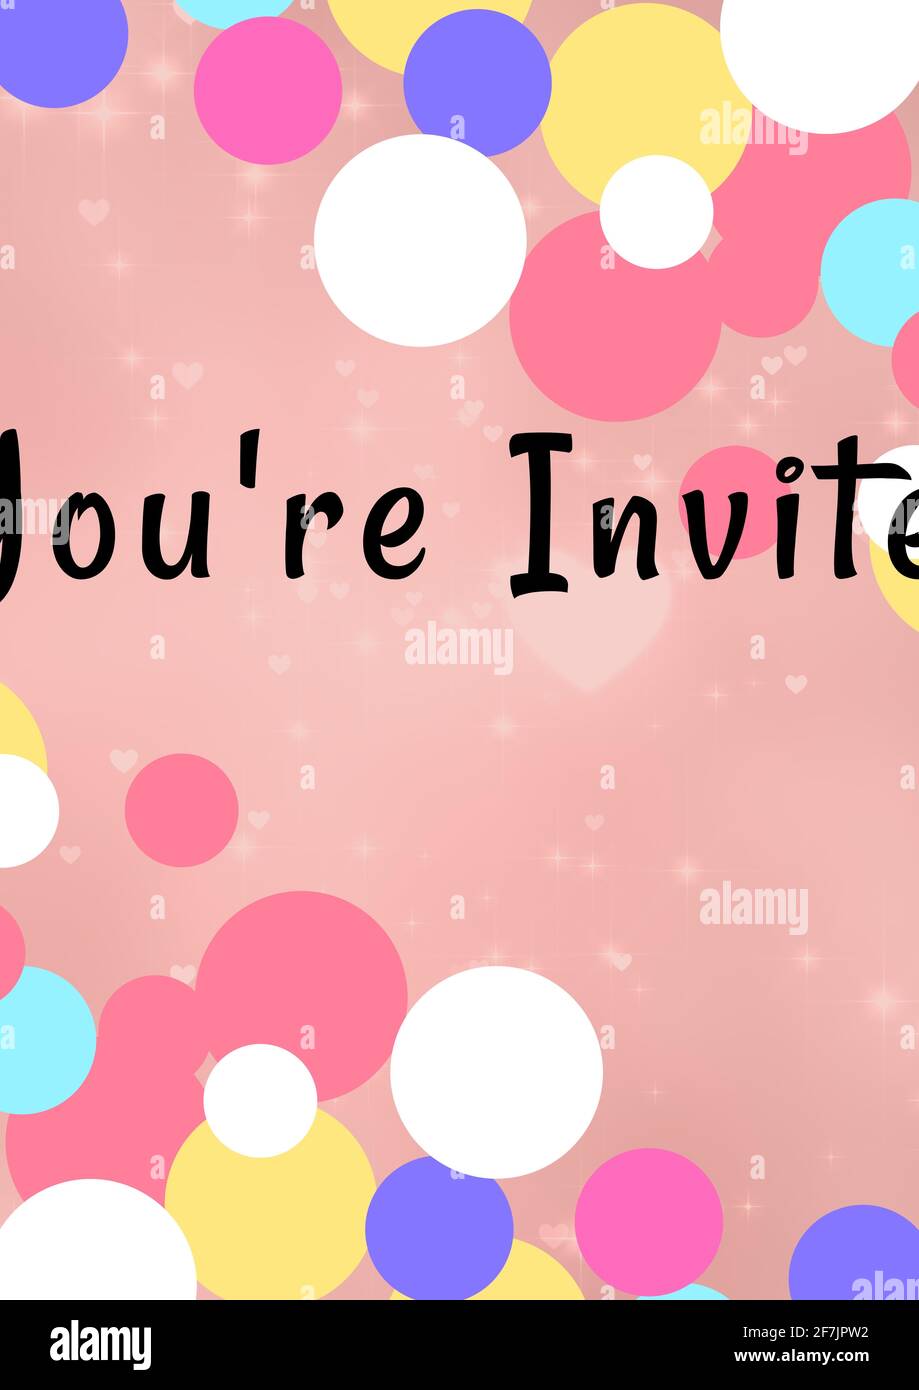 You're invited written in black with colourful circles on invite with pink background Stock Photo